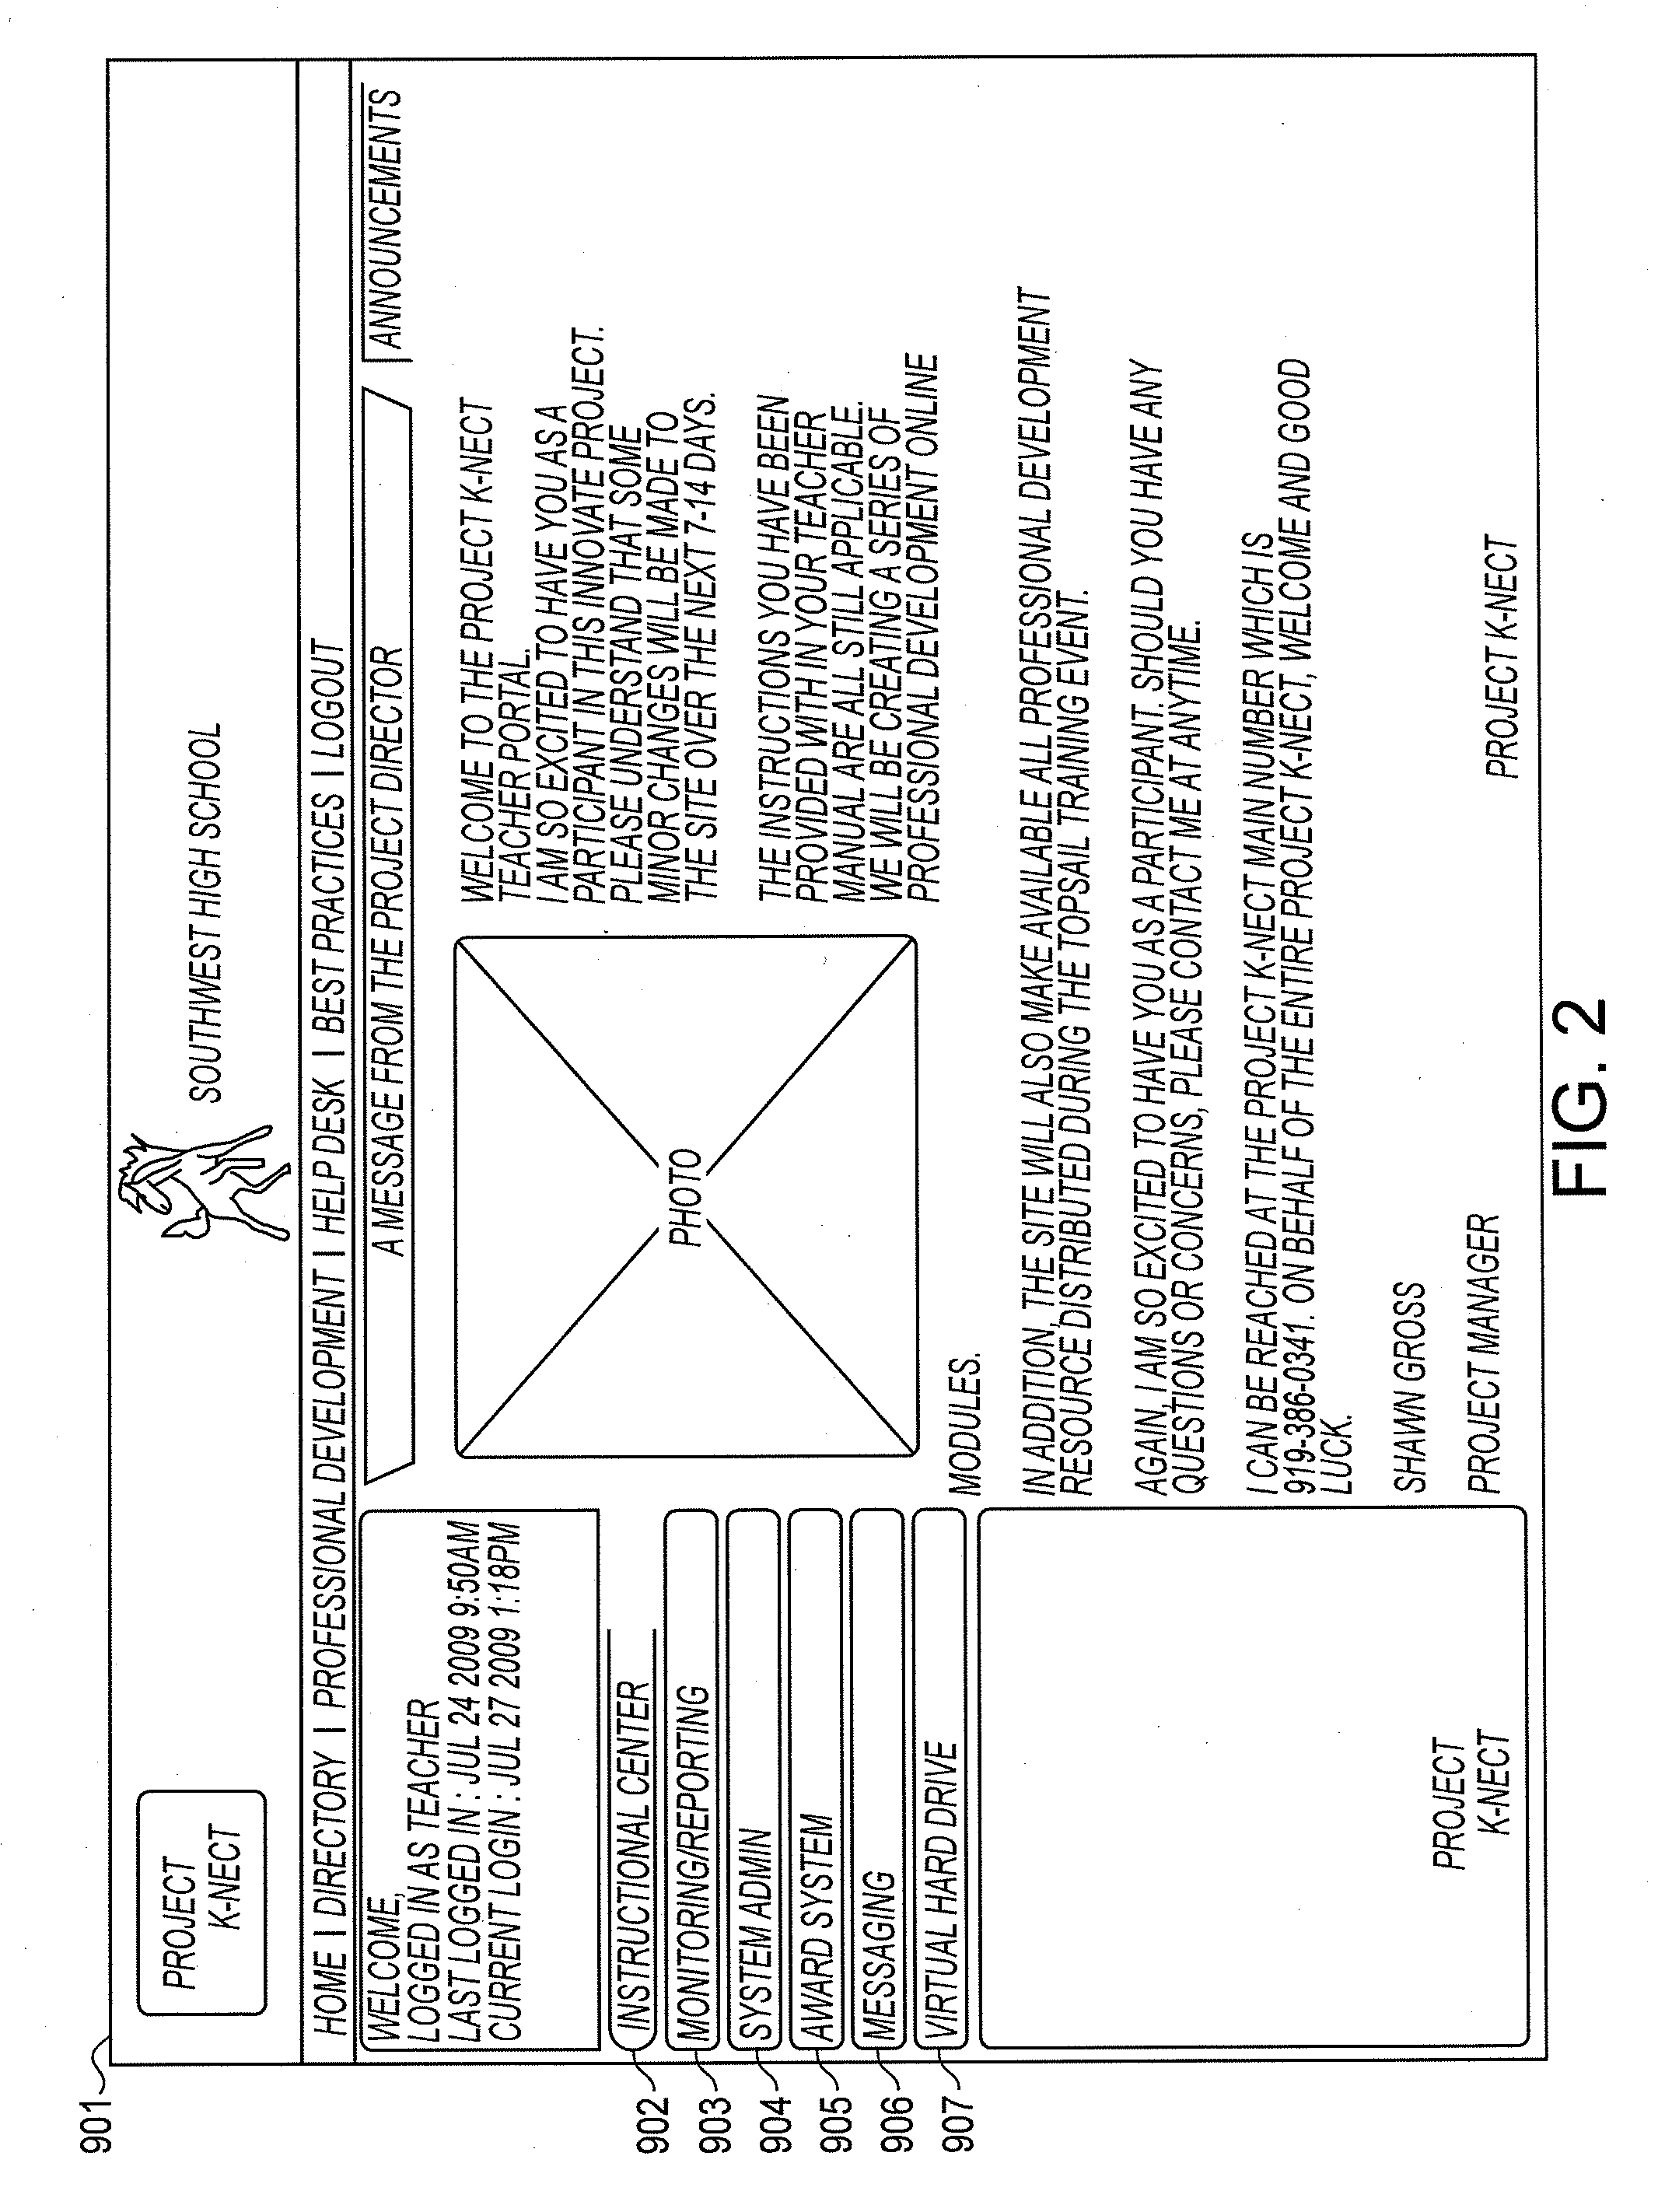 System and method of education utilizing mobile devices